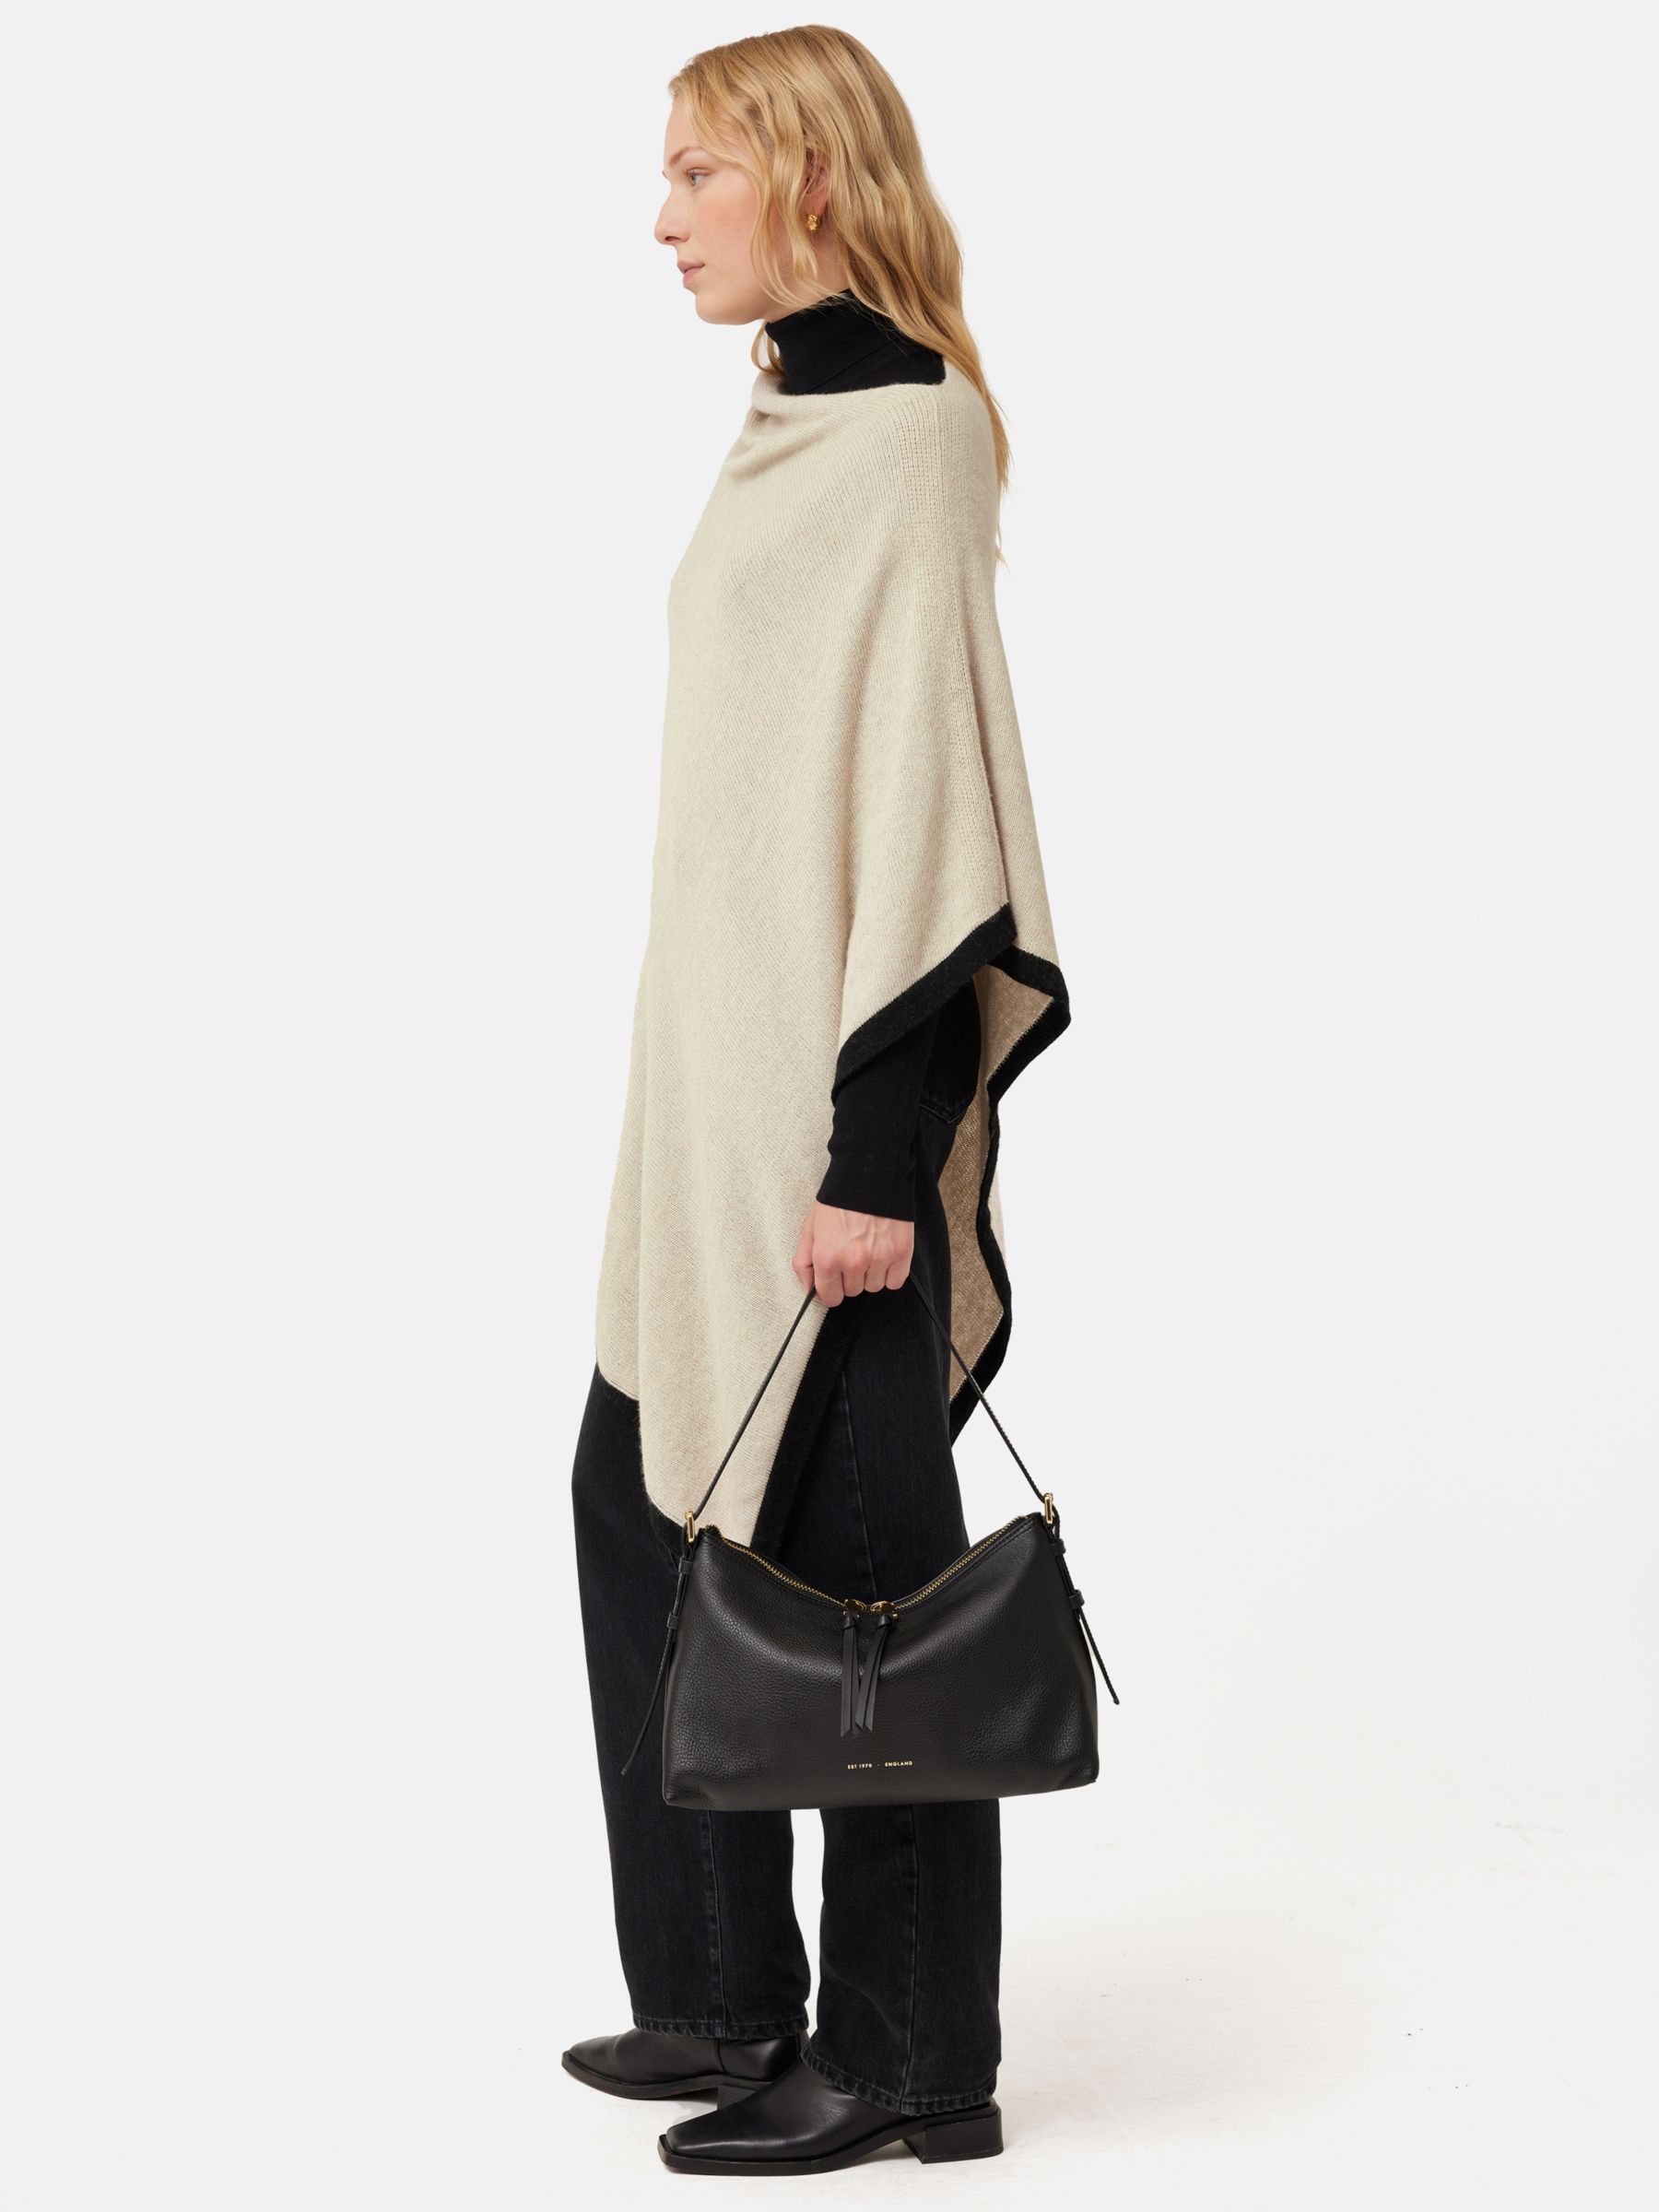 Jigsaw Wool and Cashmere Asymmetric Poncho at John Lewis & Partners